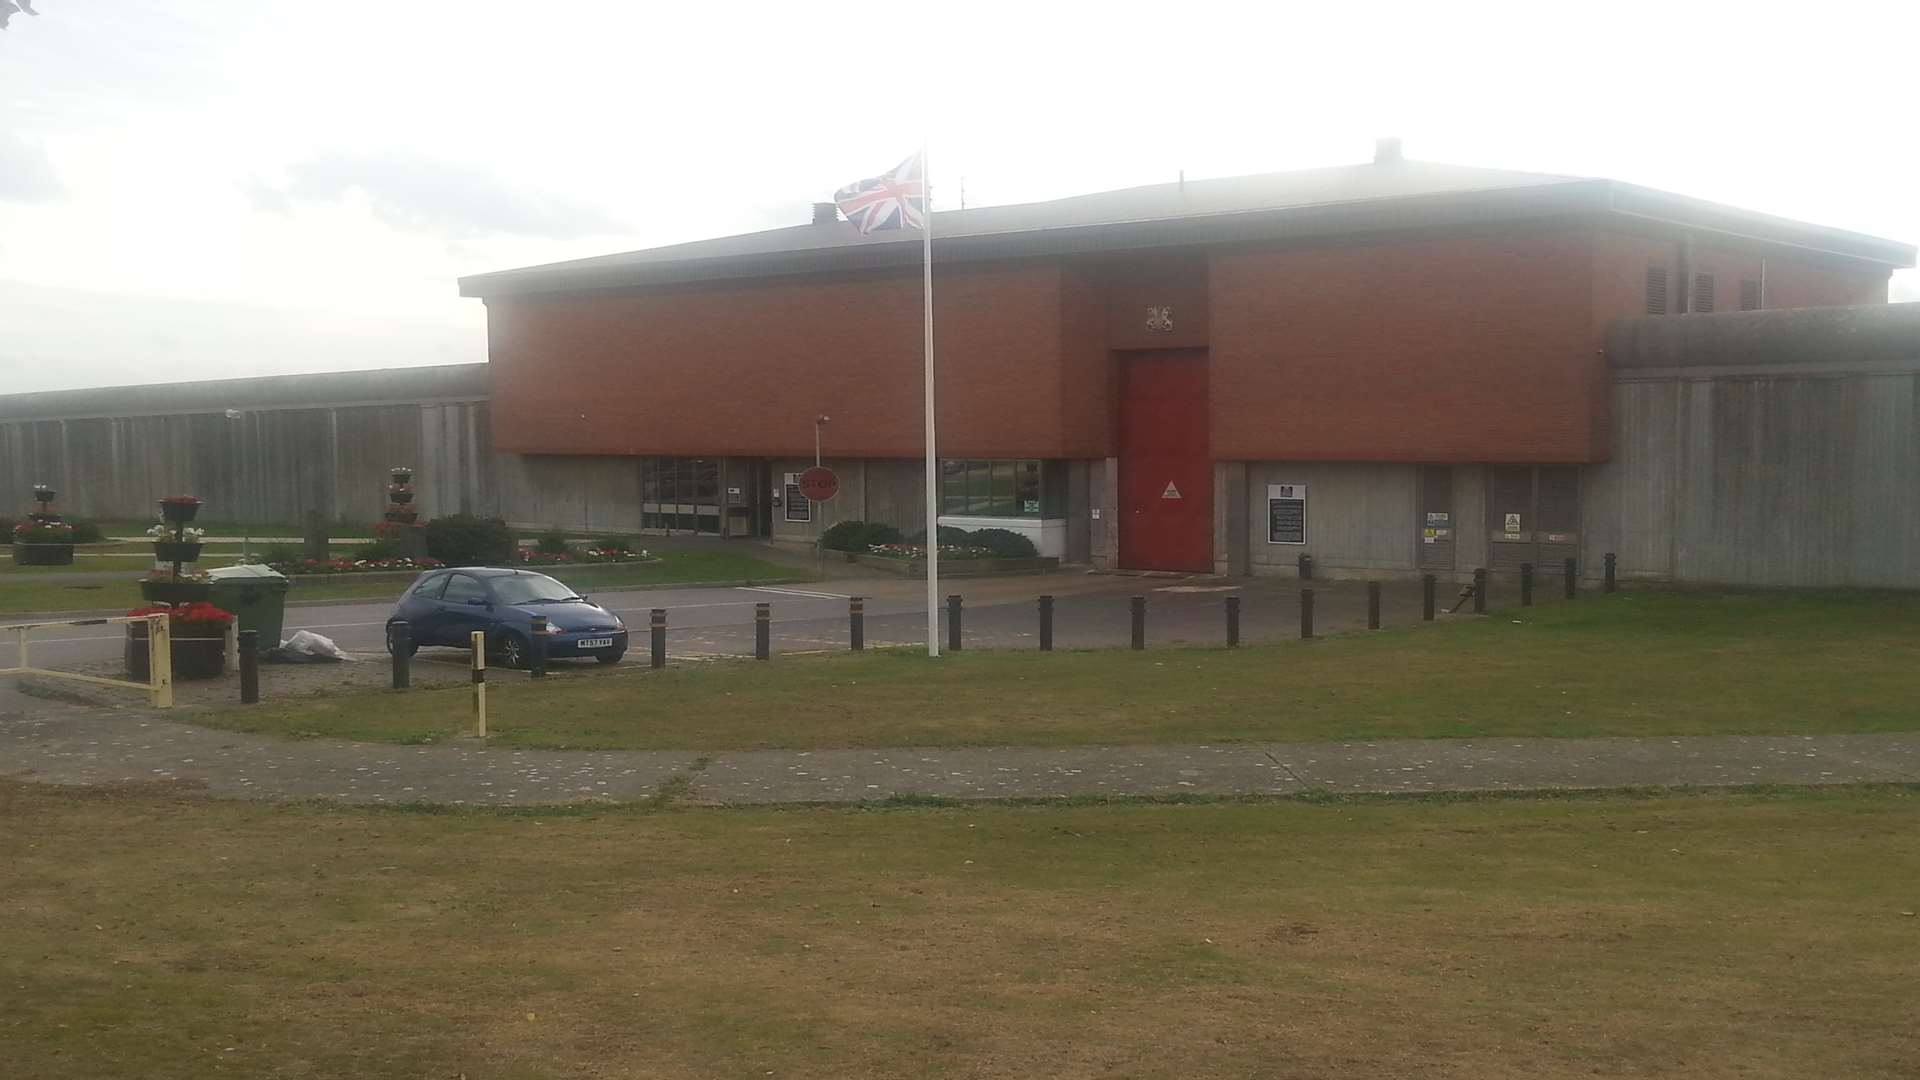 Swaleside Prison in Eastchurch on the Isle of Sheppey